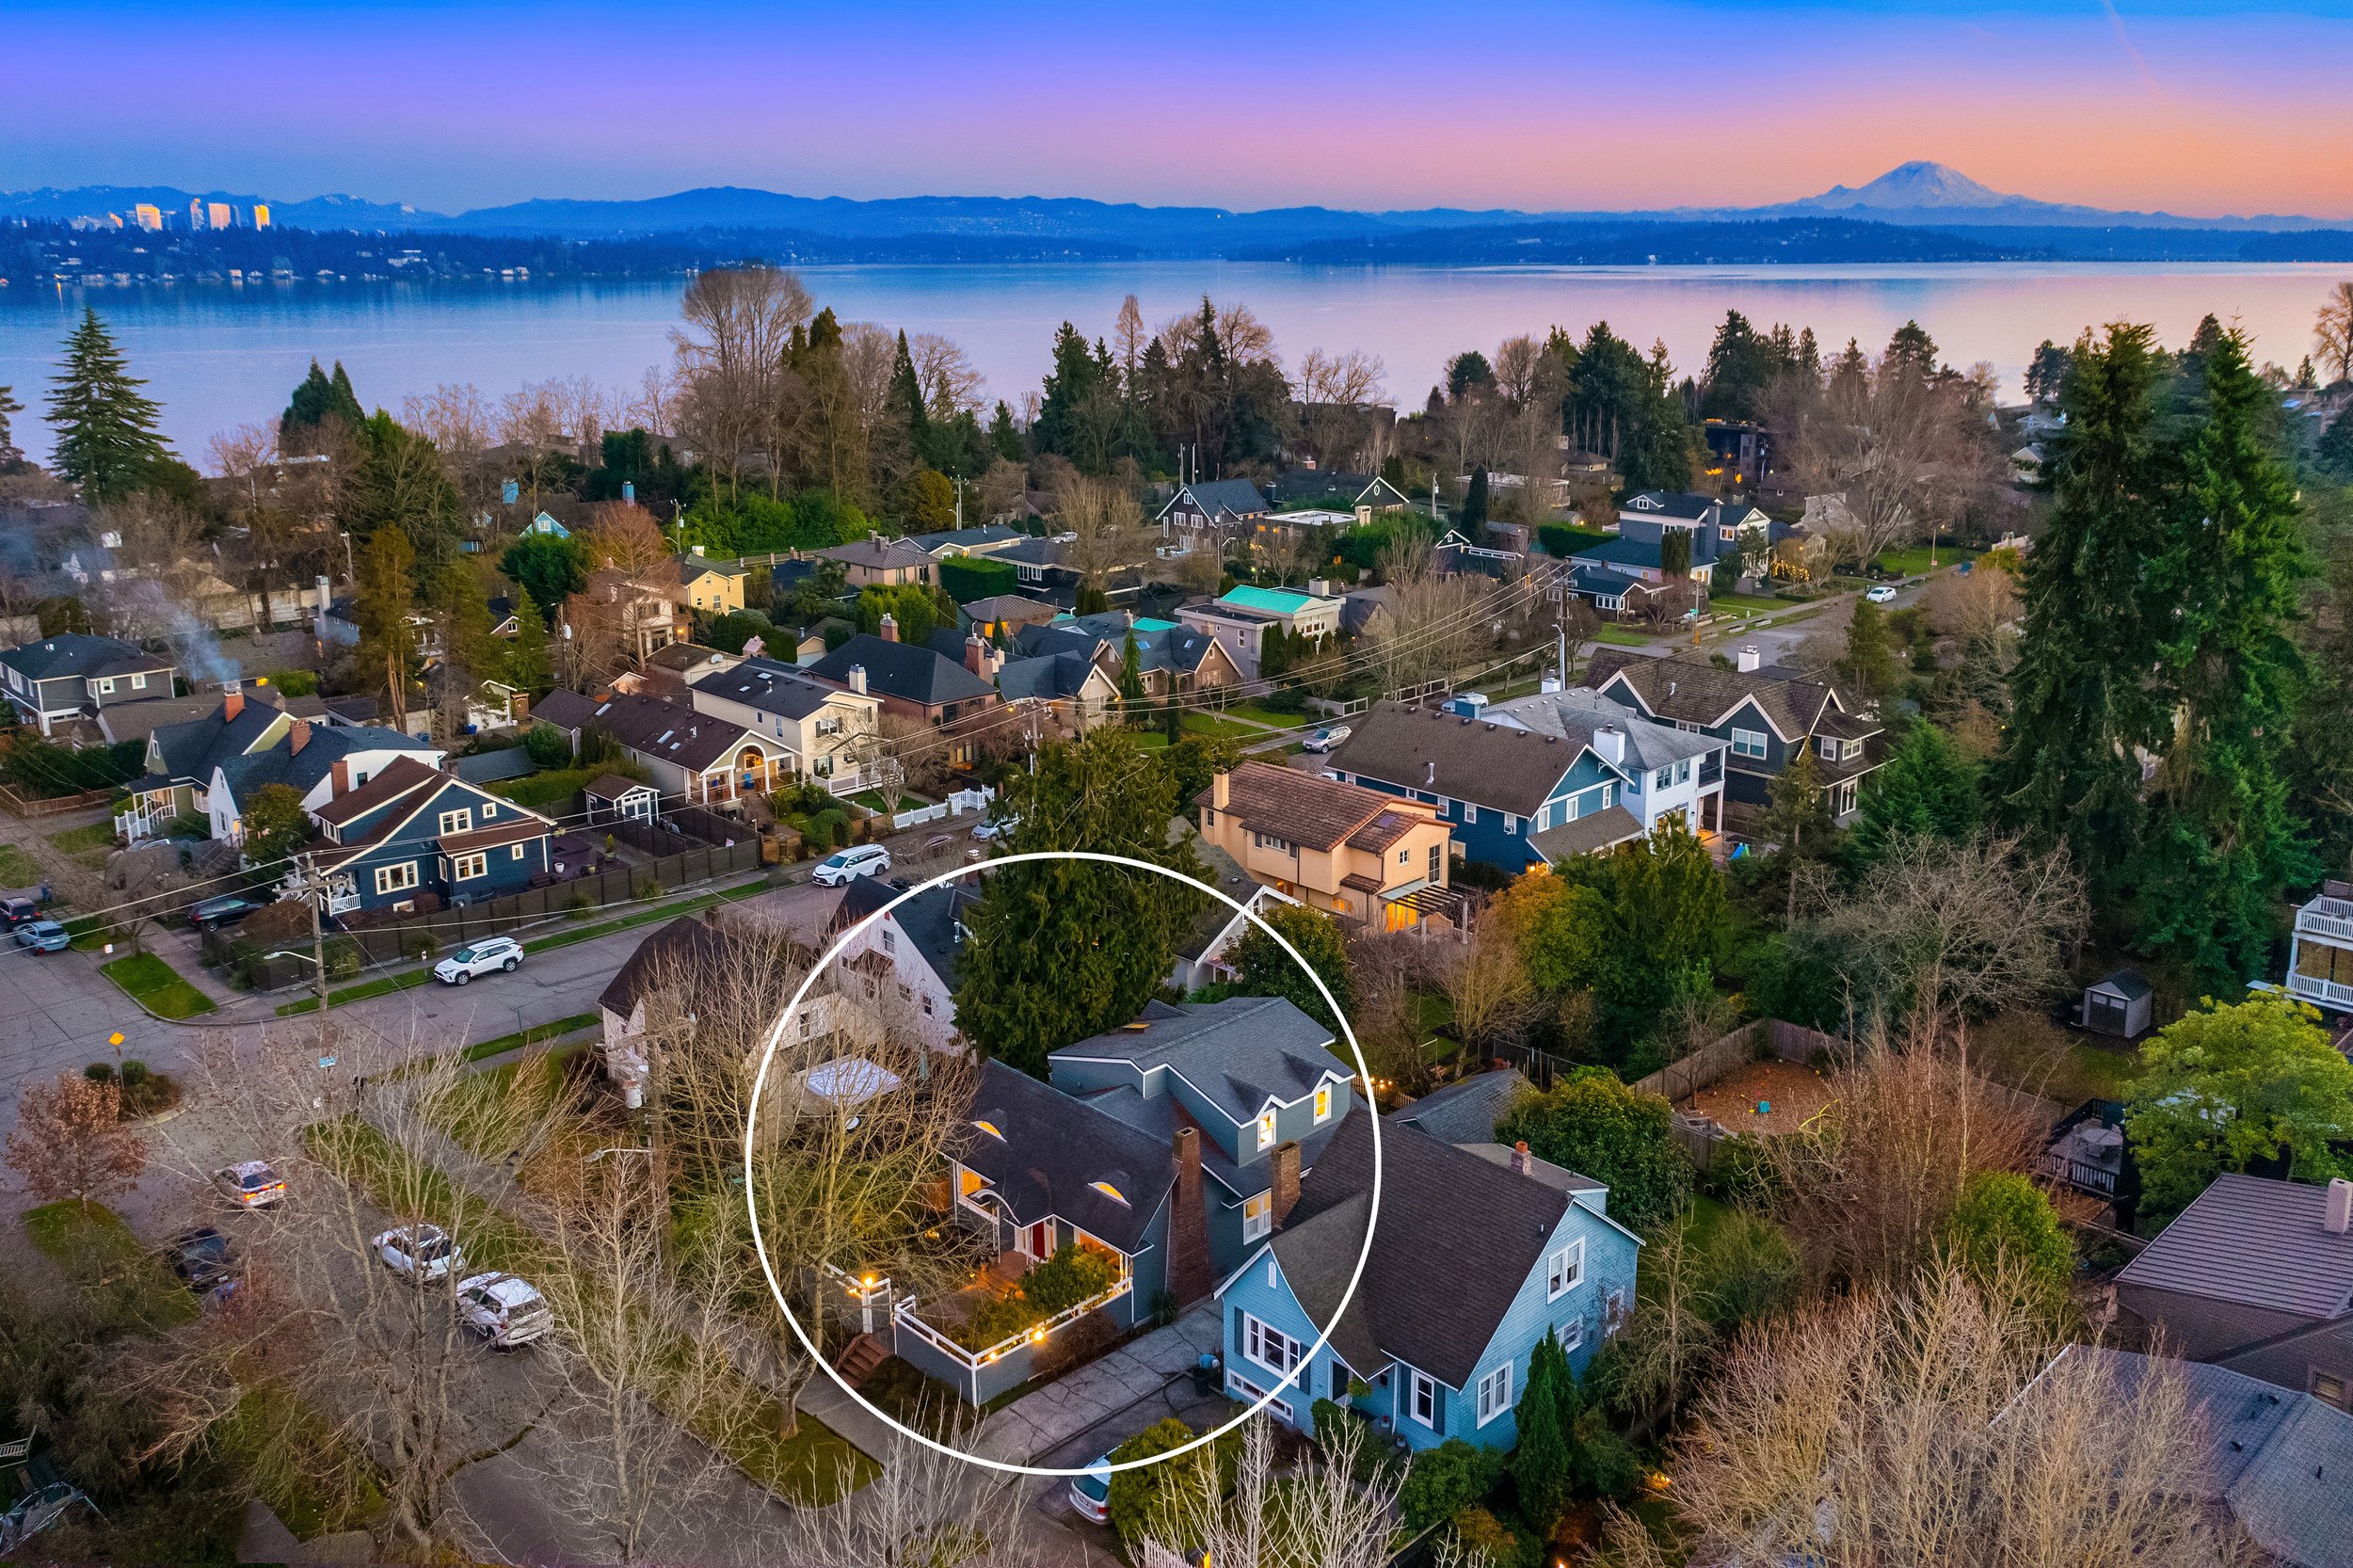  Beautifully appointed home offers an easy lifestyle among rich community surroundings. Stroll to Madison beach, neighborhood shops, coffee, diners, wine bars, Seattle Tennis Club + McGilvra Elementary. 